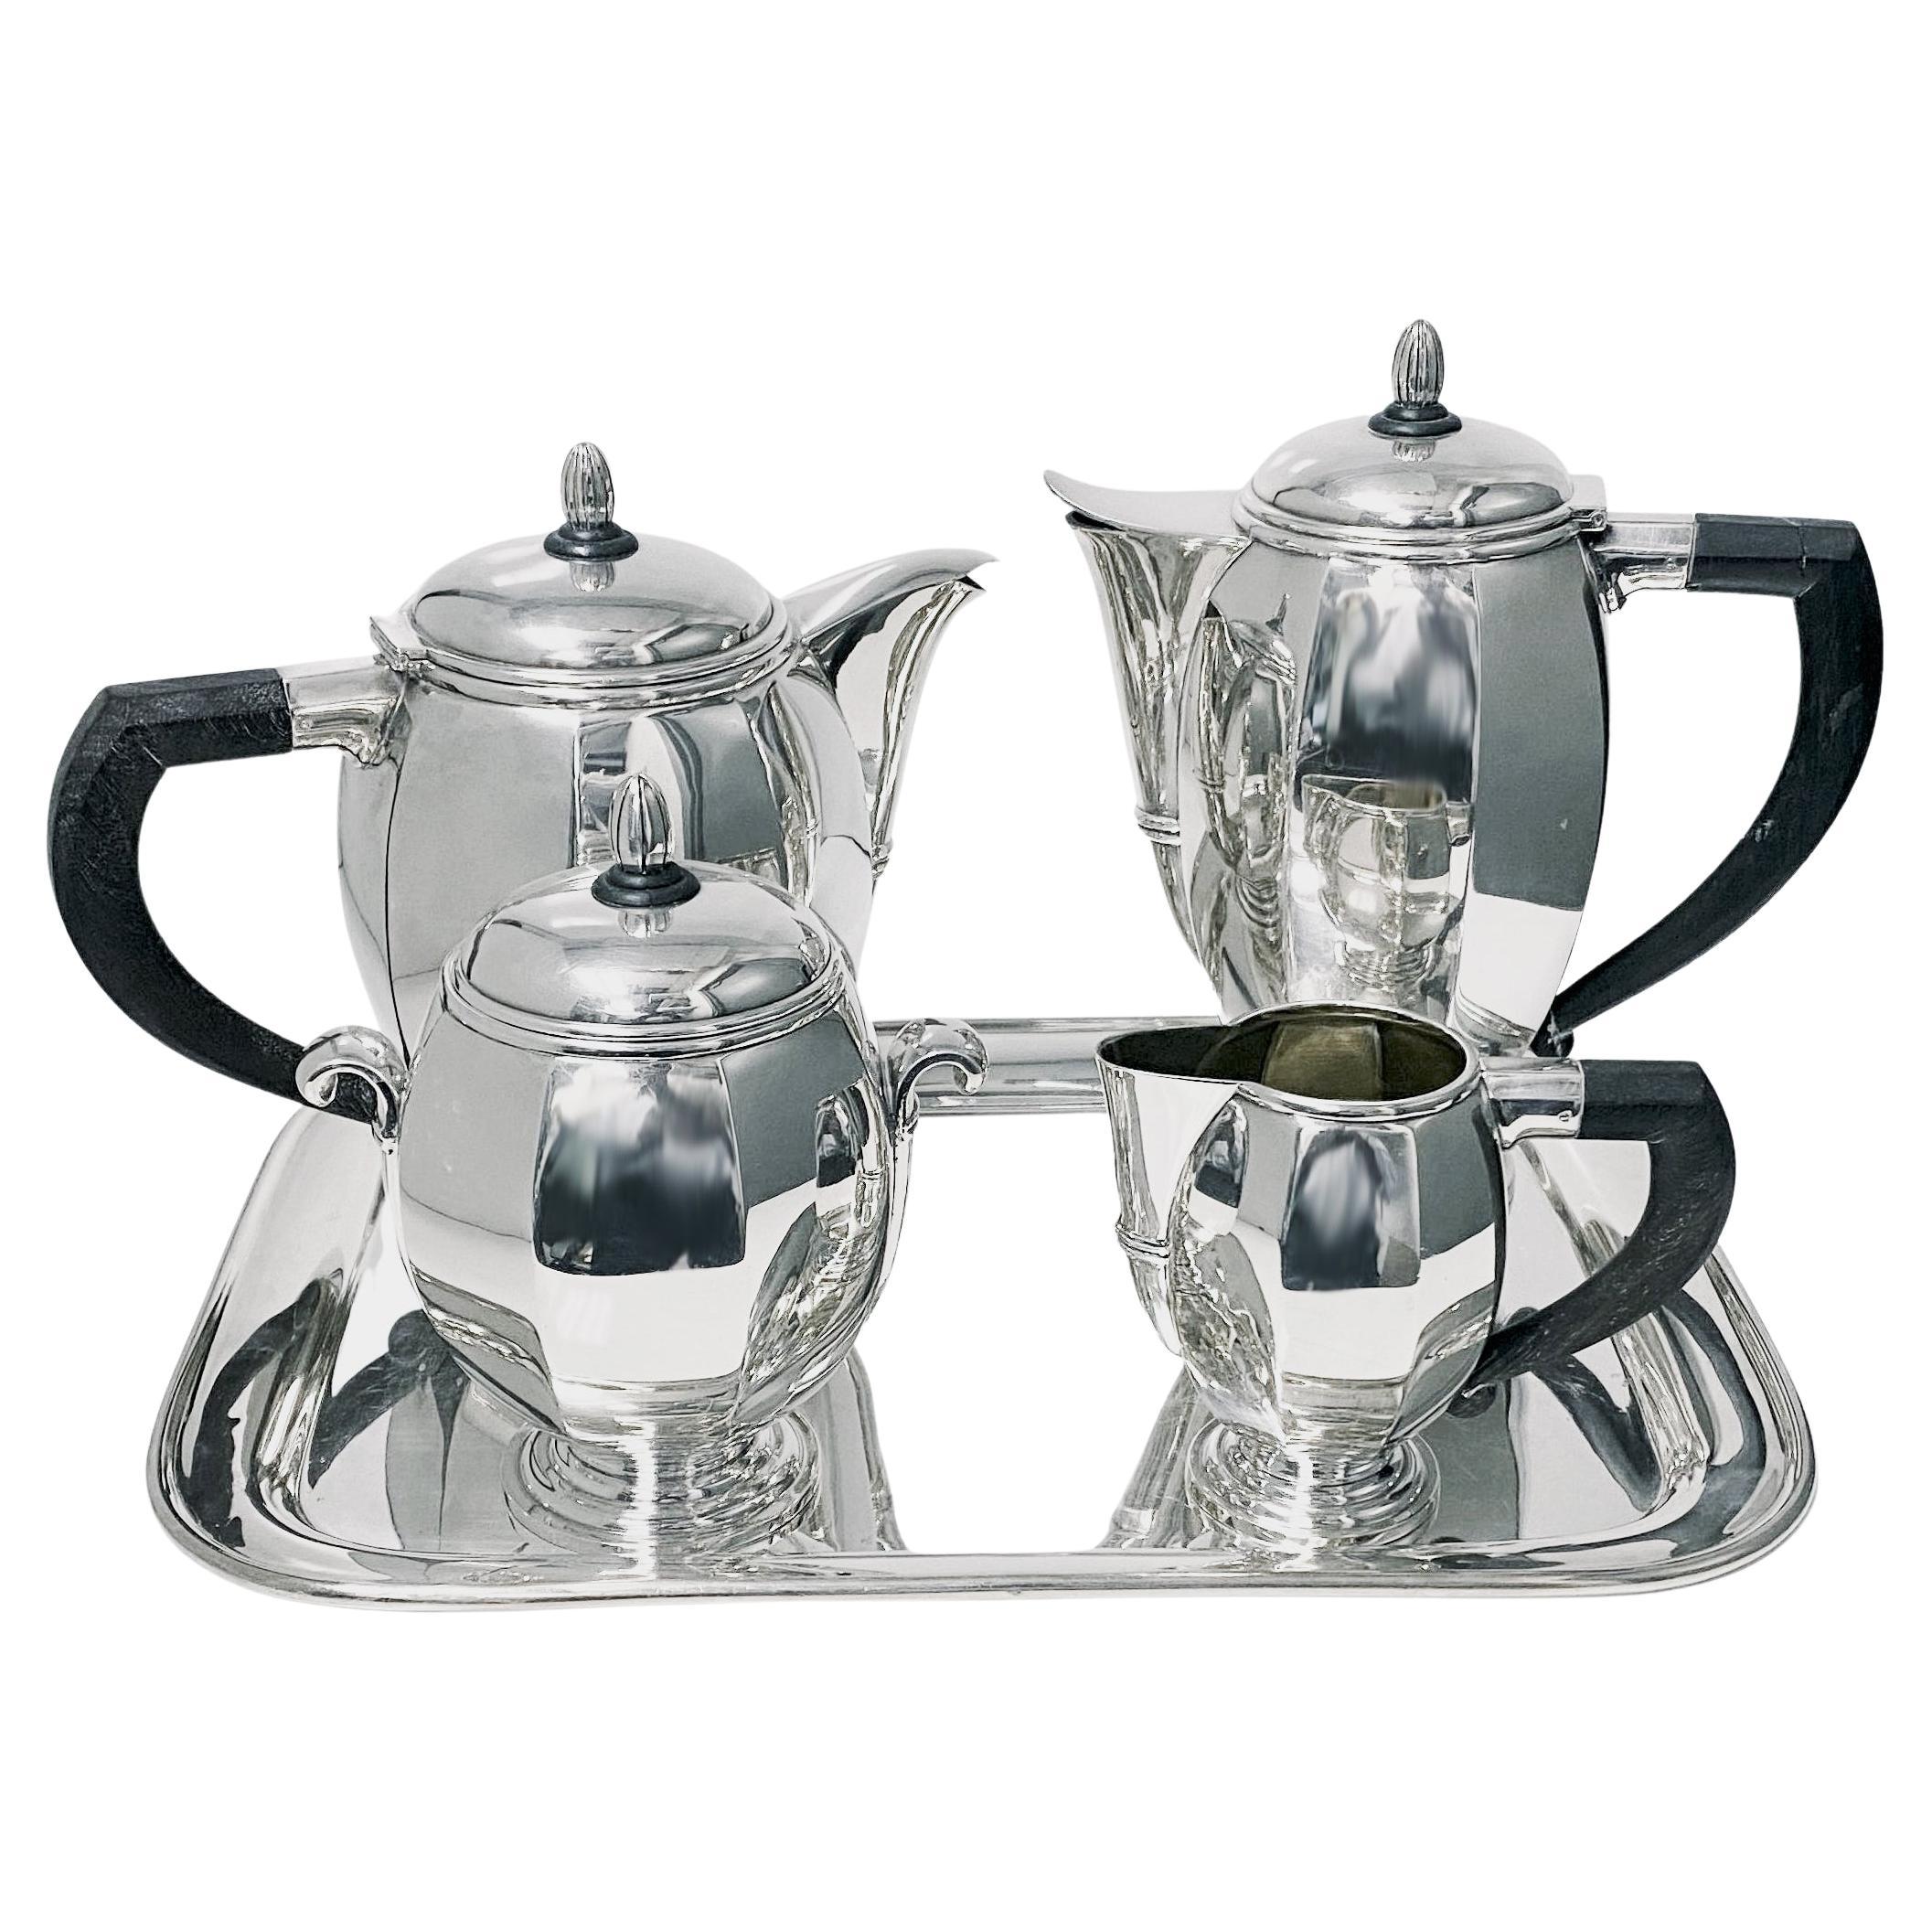 Art Deco Silver Plate Tea and Coffee Service, France C.1930